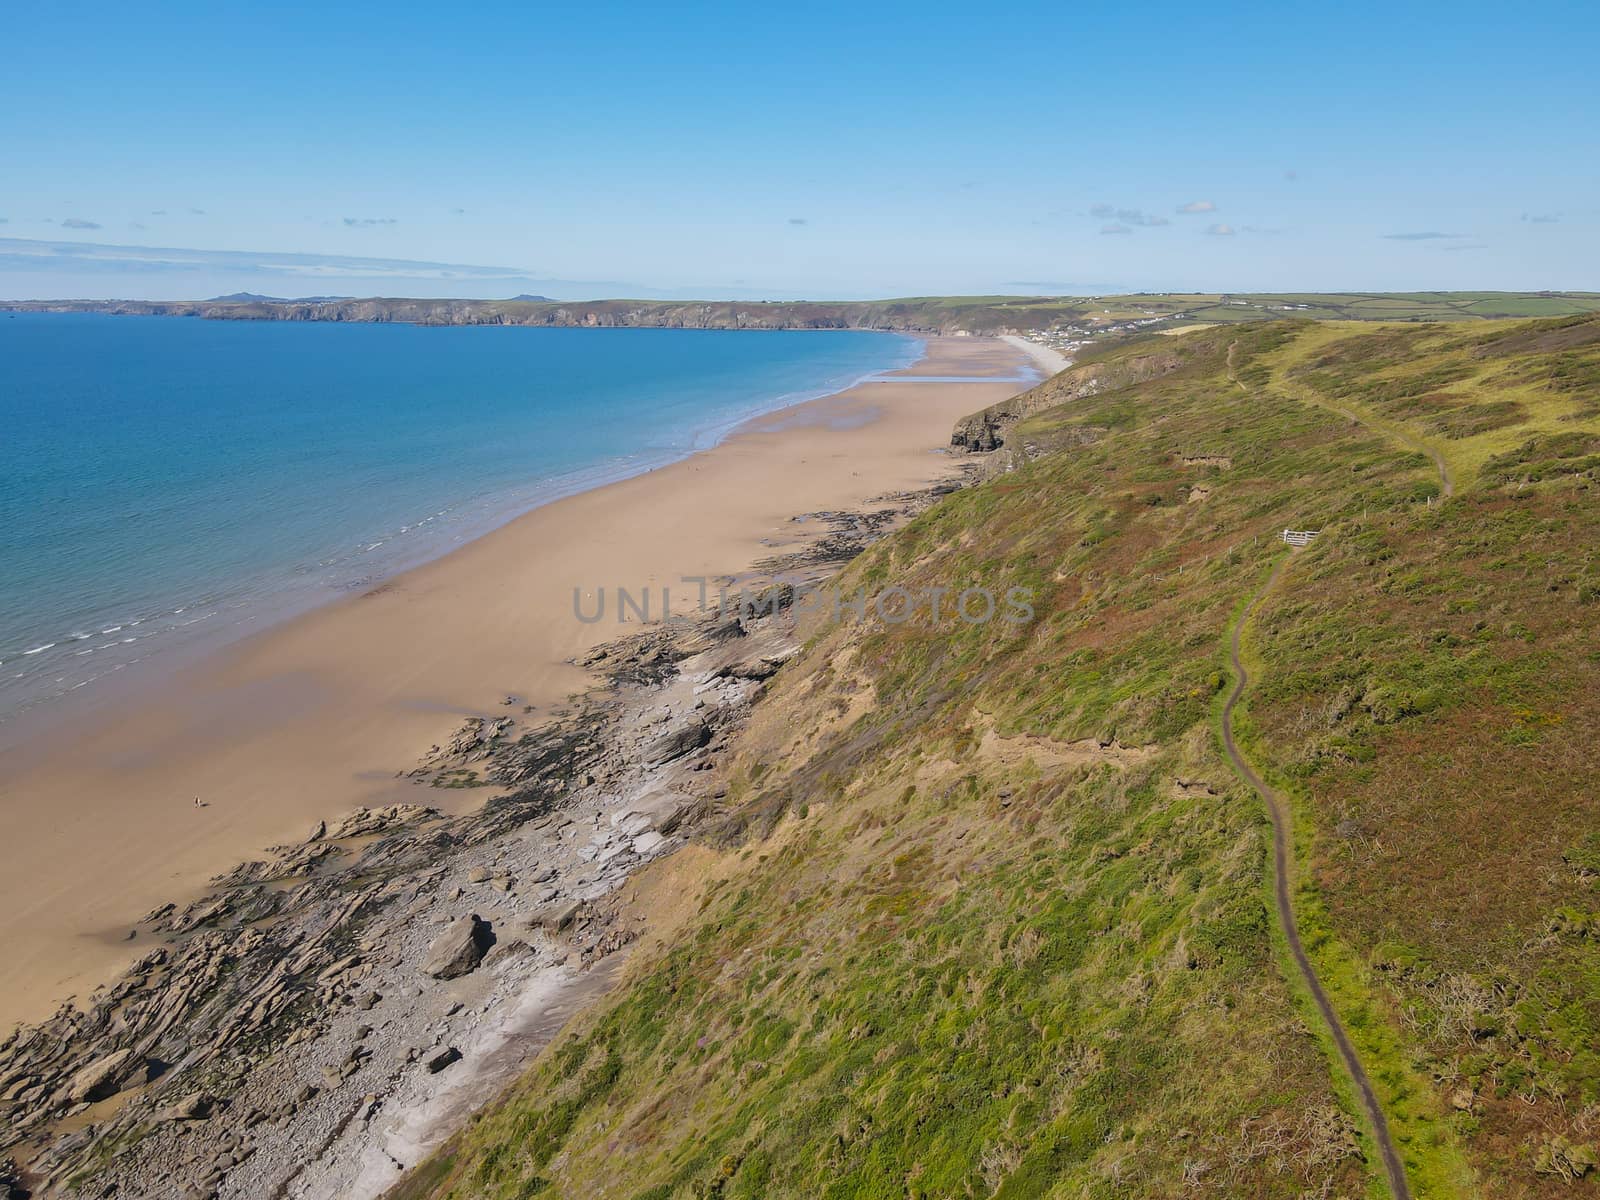 Drone Shot of Newgale Beach, Pembrokeshie, Wales, UK from public land showing stunning coastal views with a light blue ocean.